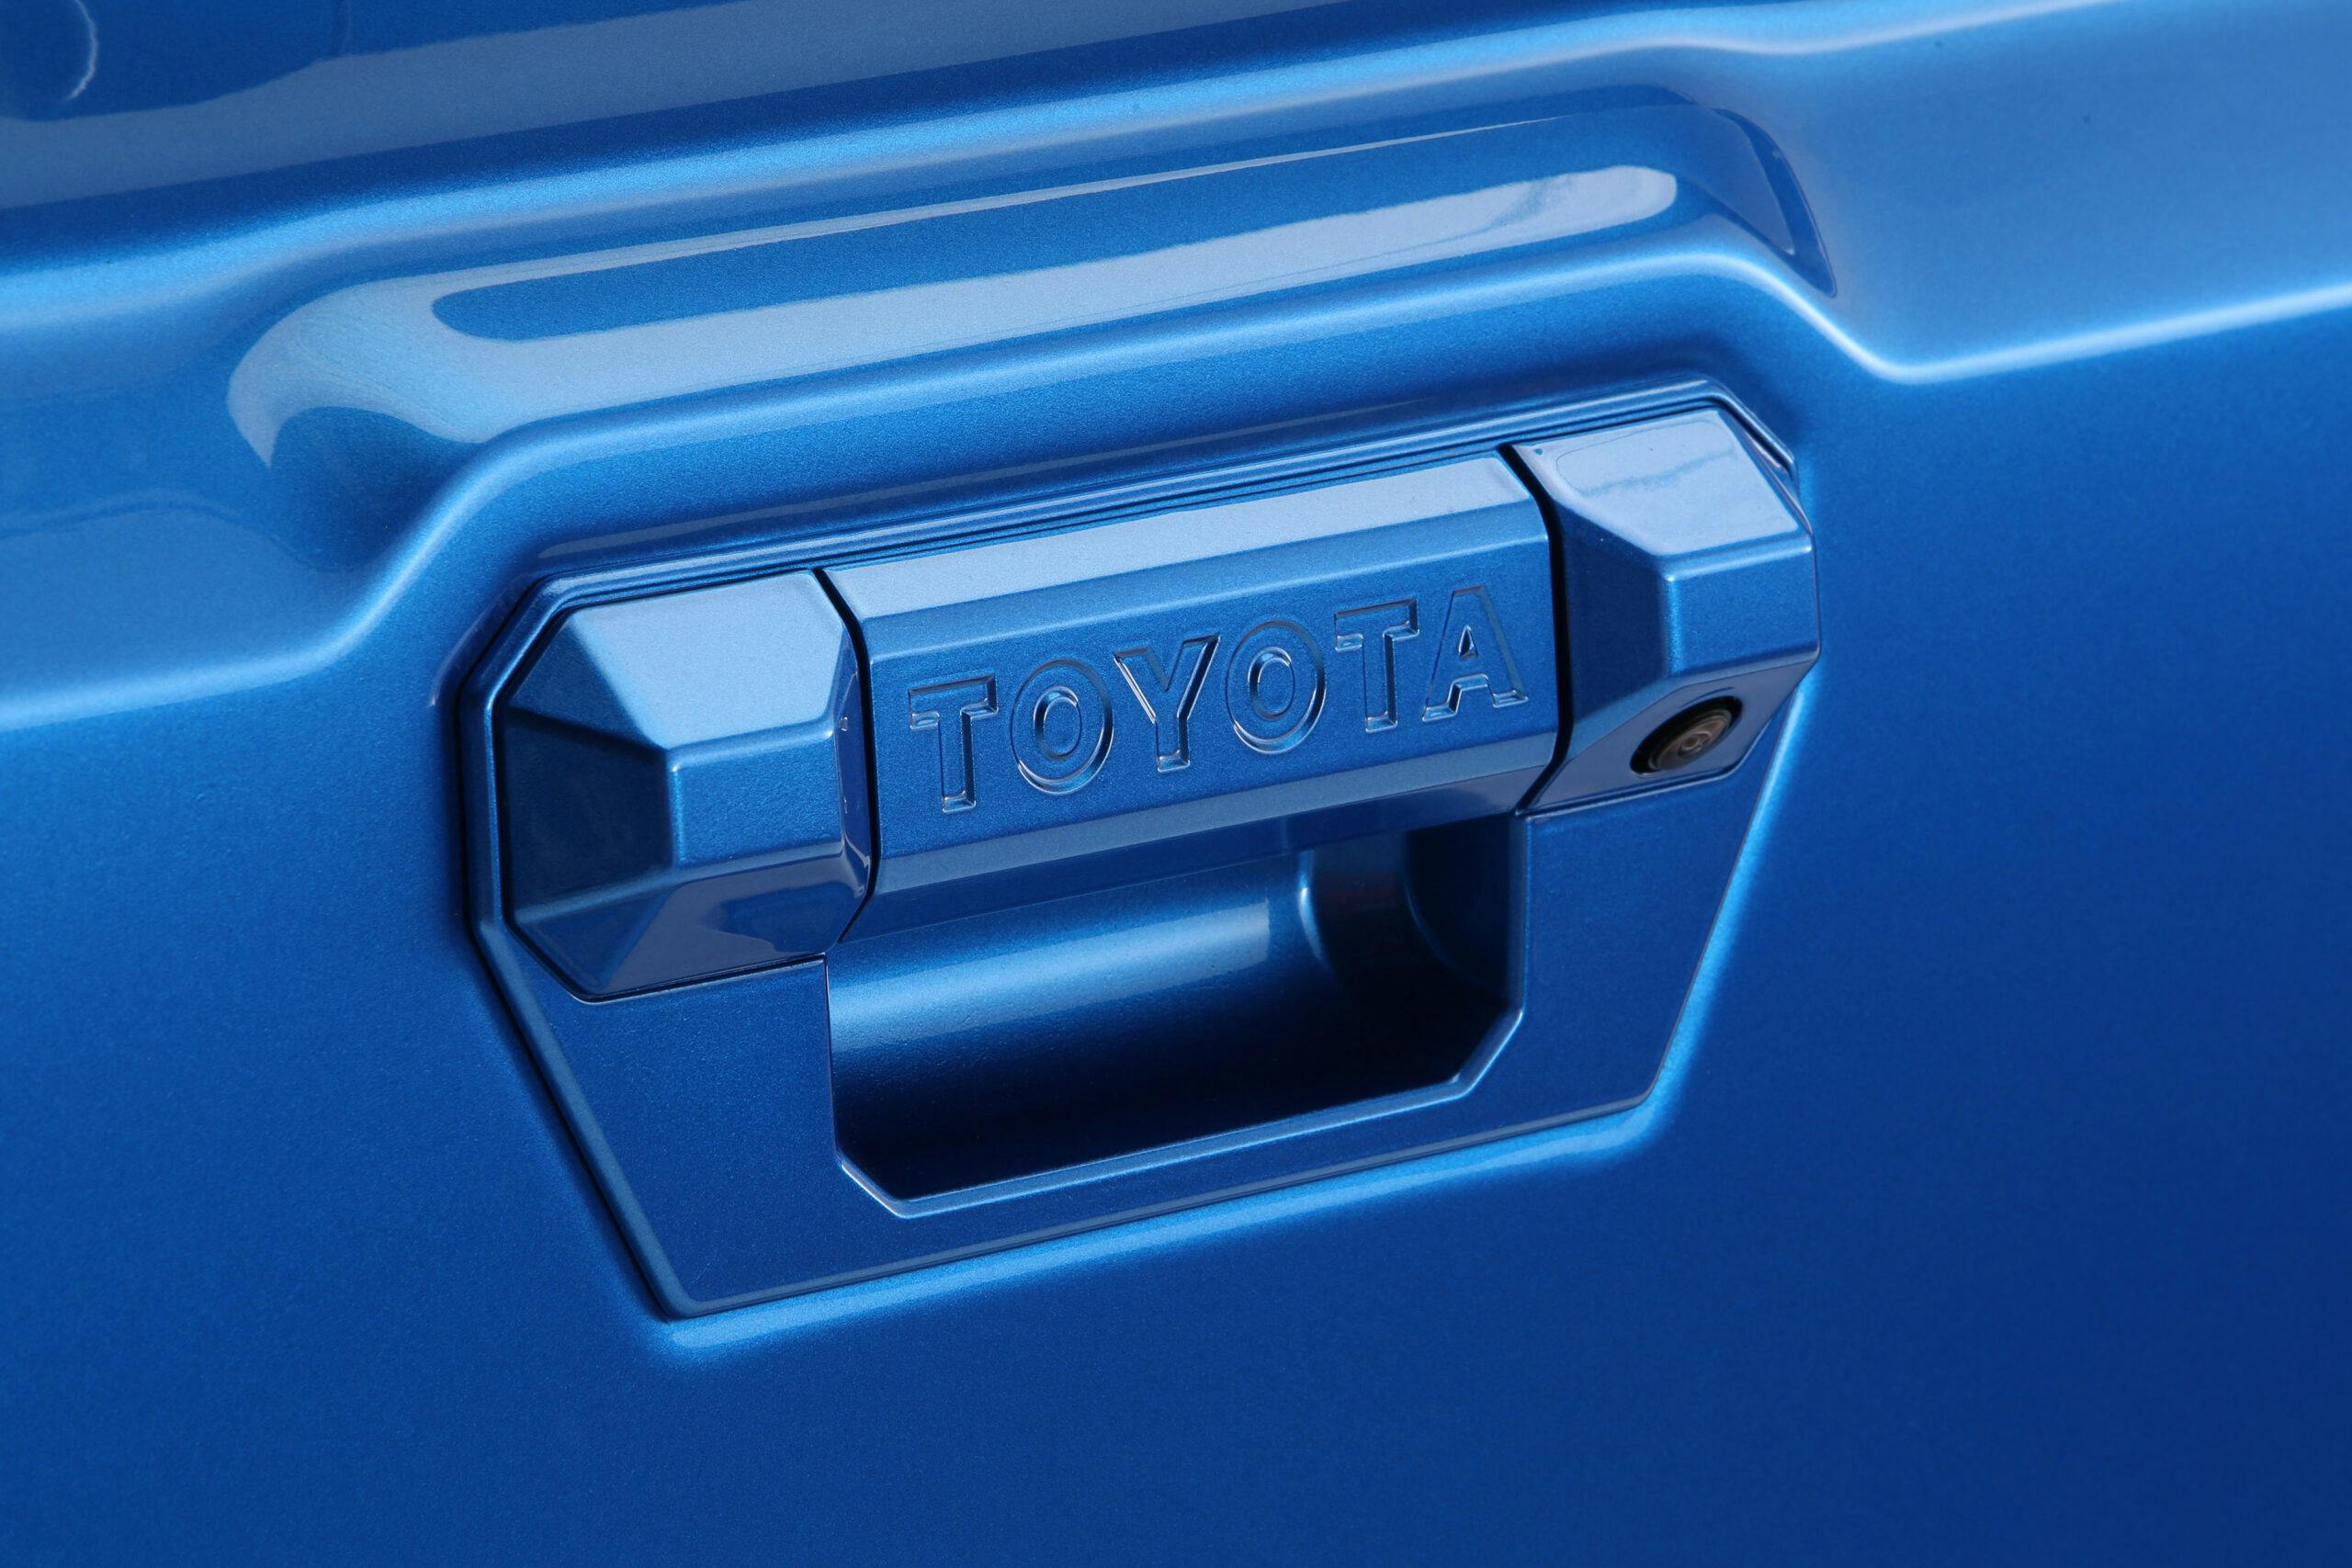 Toyota Tacoma X-Runner Concept exterior tailgate detail